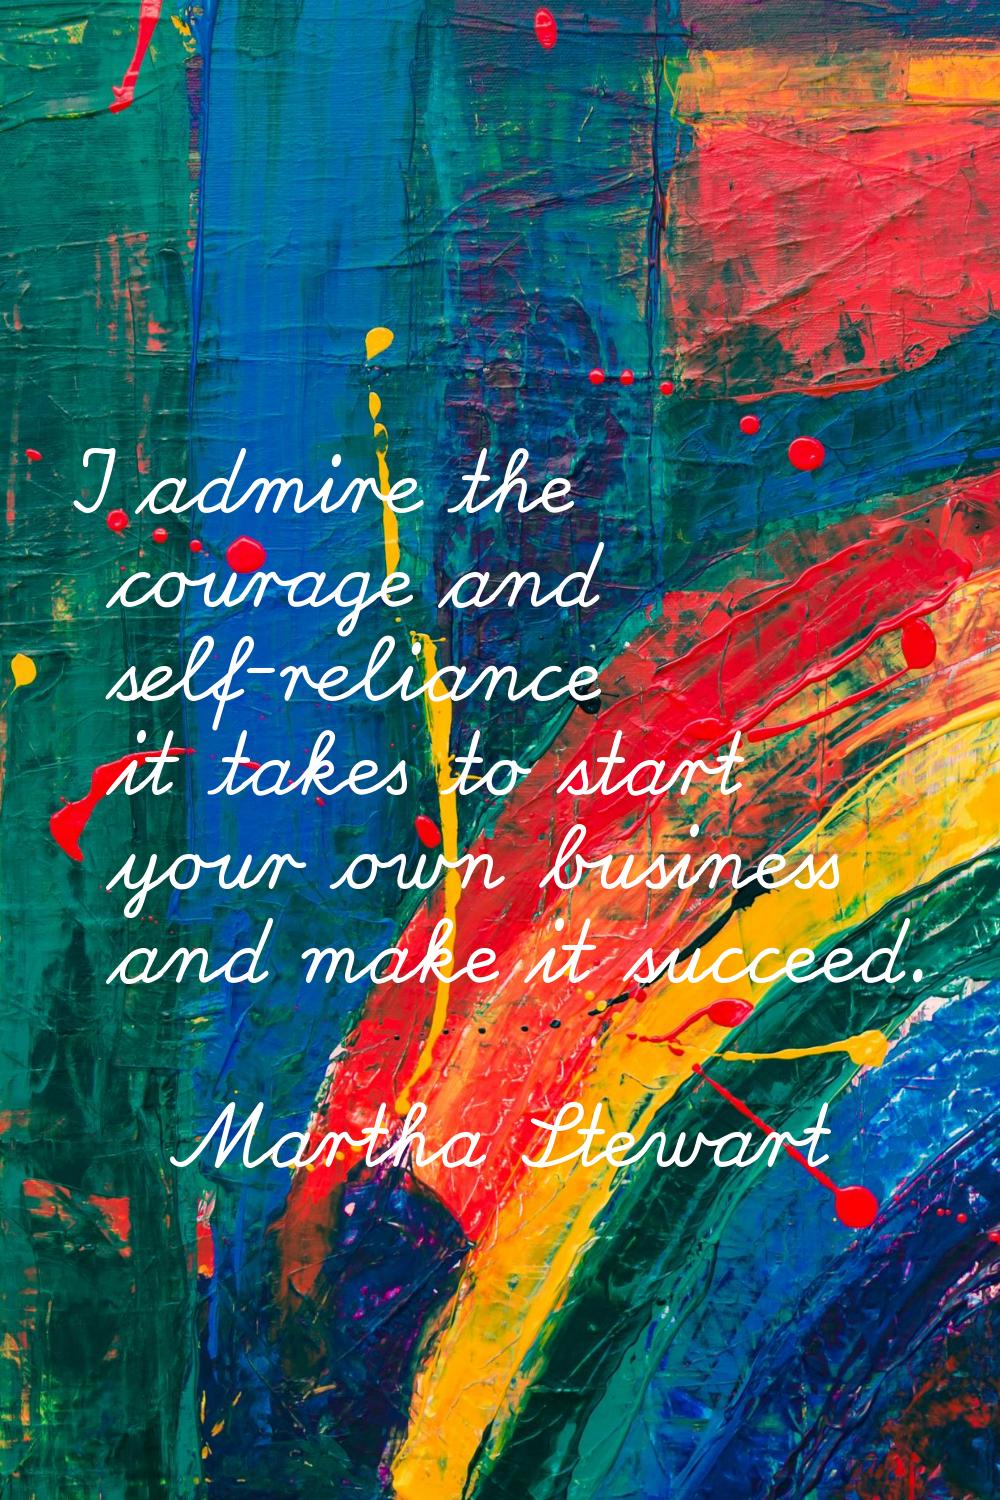 I admire the courage and self-reliance it takes to start your own business and make it succeed.